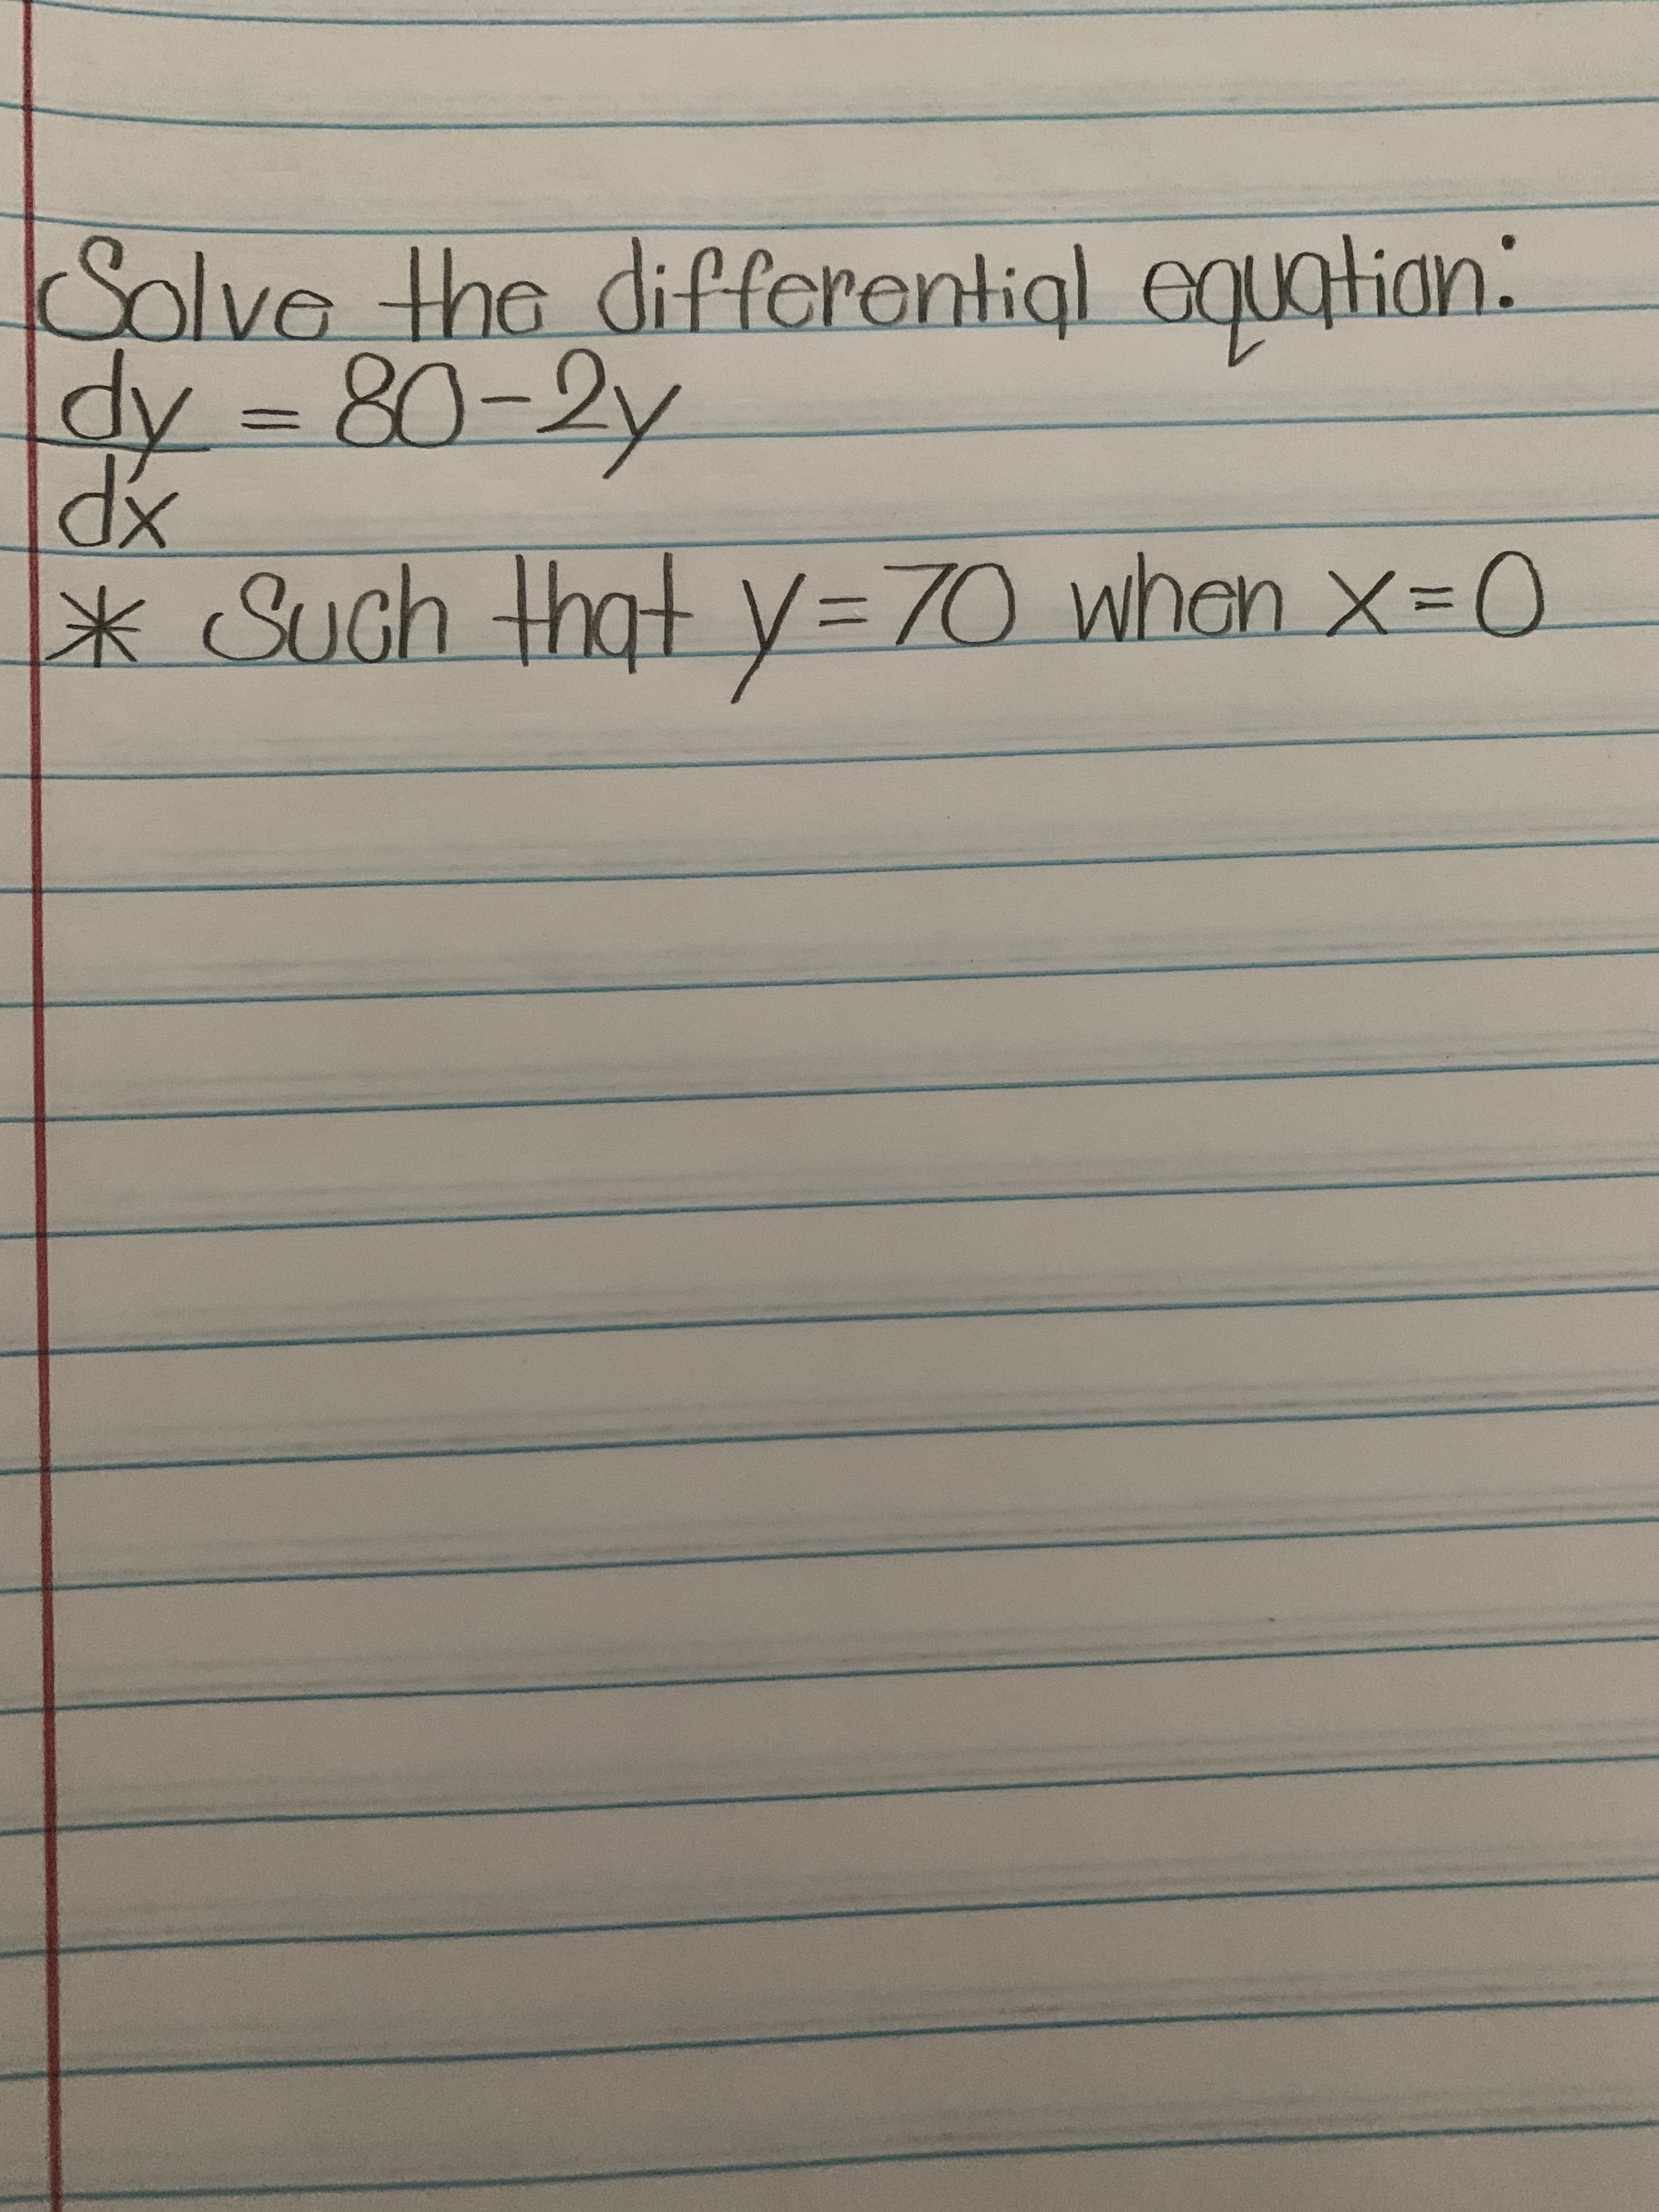 Solve the differentigl equatian:
dy = 80-2y
米(
* Such that y=70 when x=0
